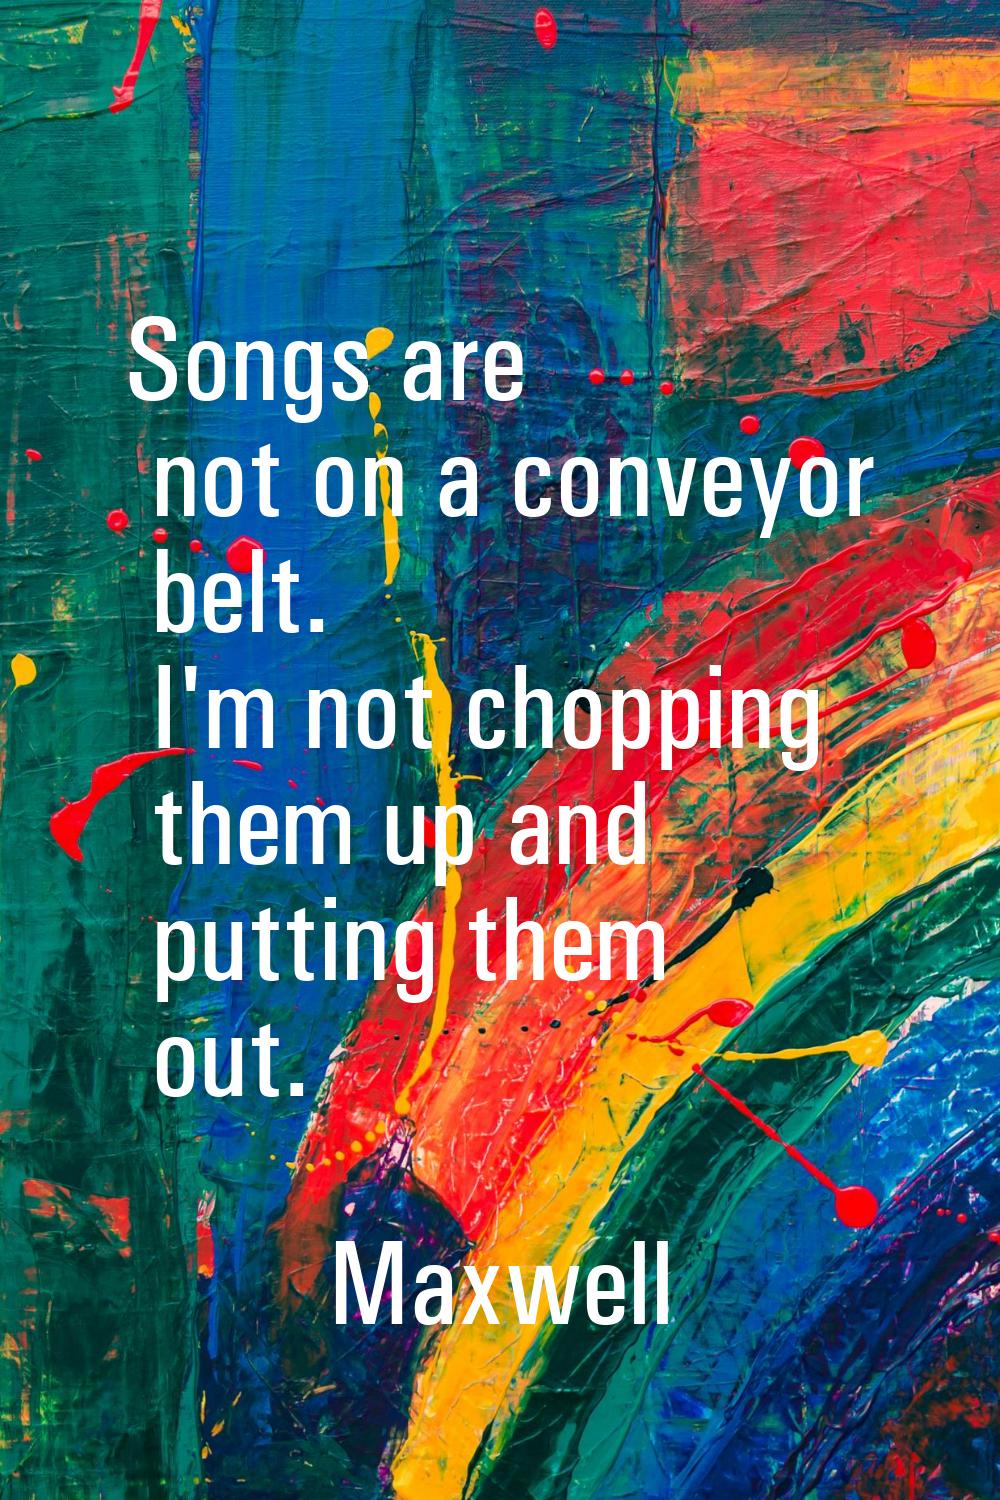 Songs are not on a conveyor belt. I'm not chopping them up and putting them out.